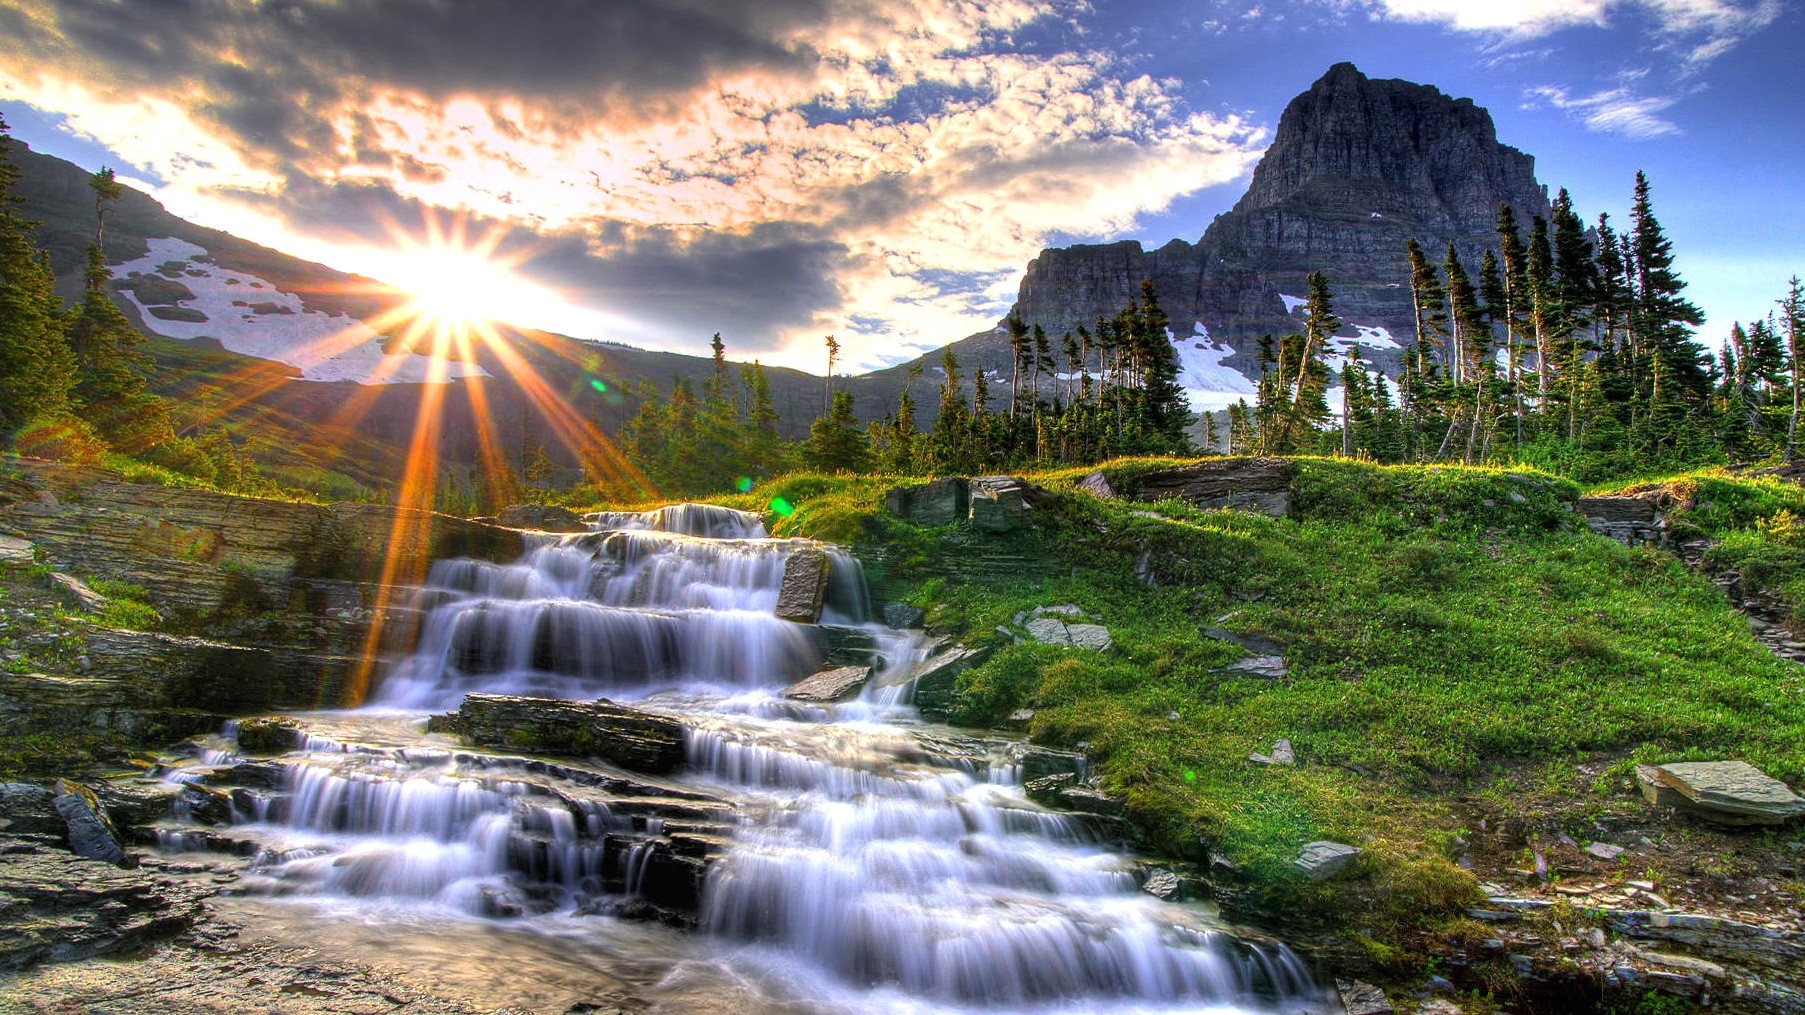 Waterfall In The Mountains Cool Nature Wallpaper Amazing